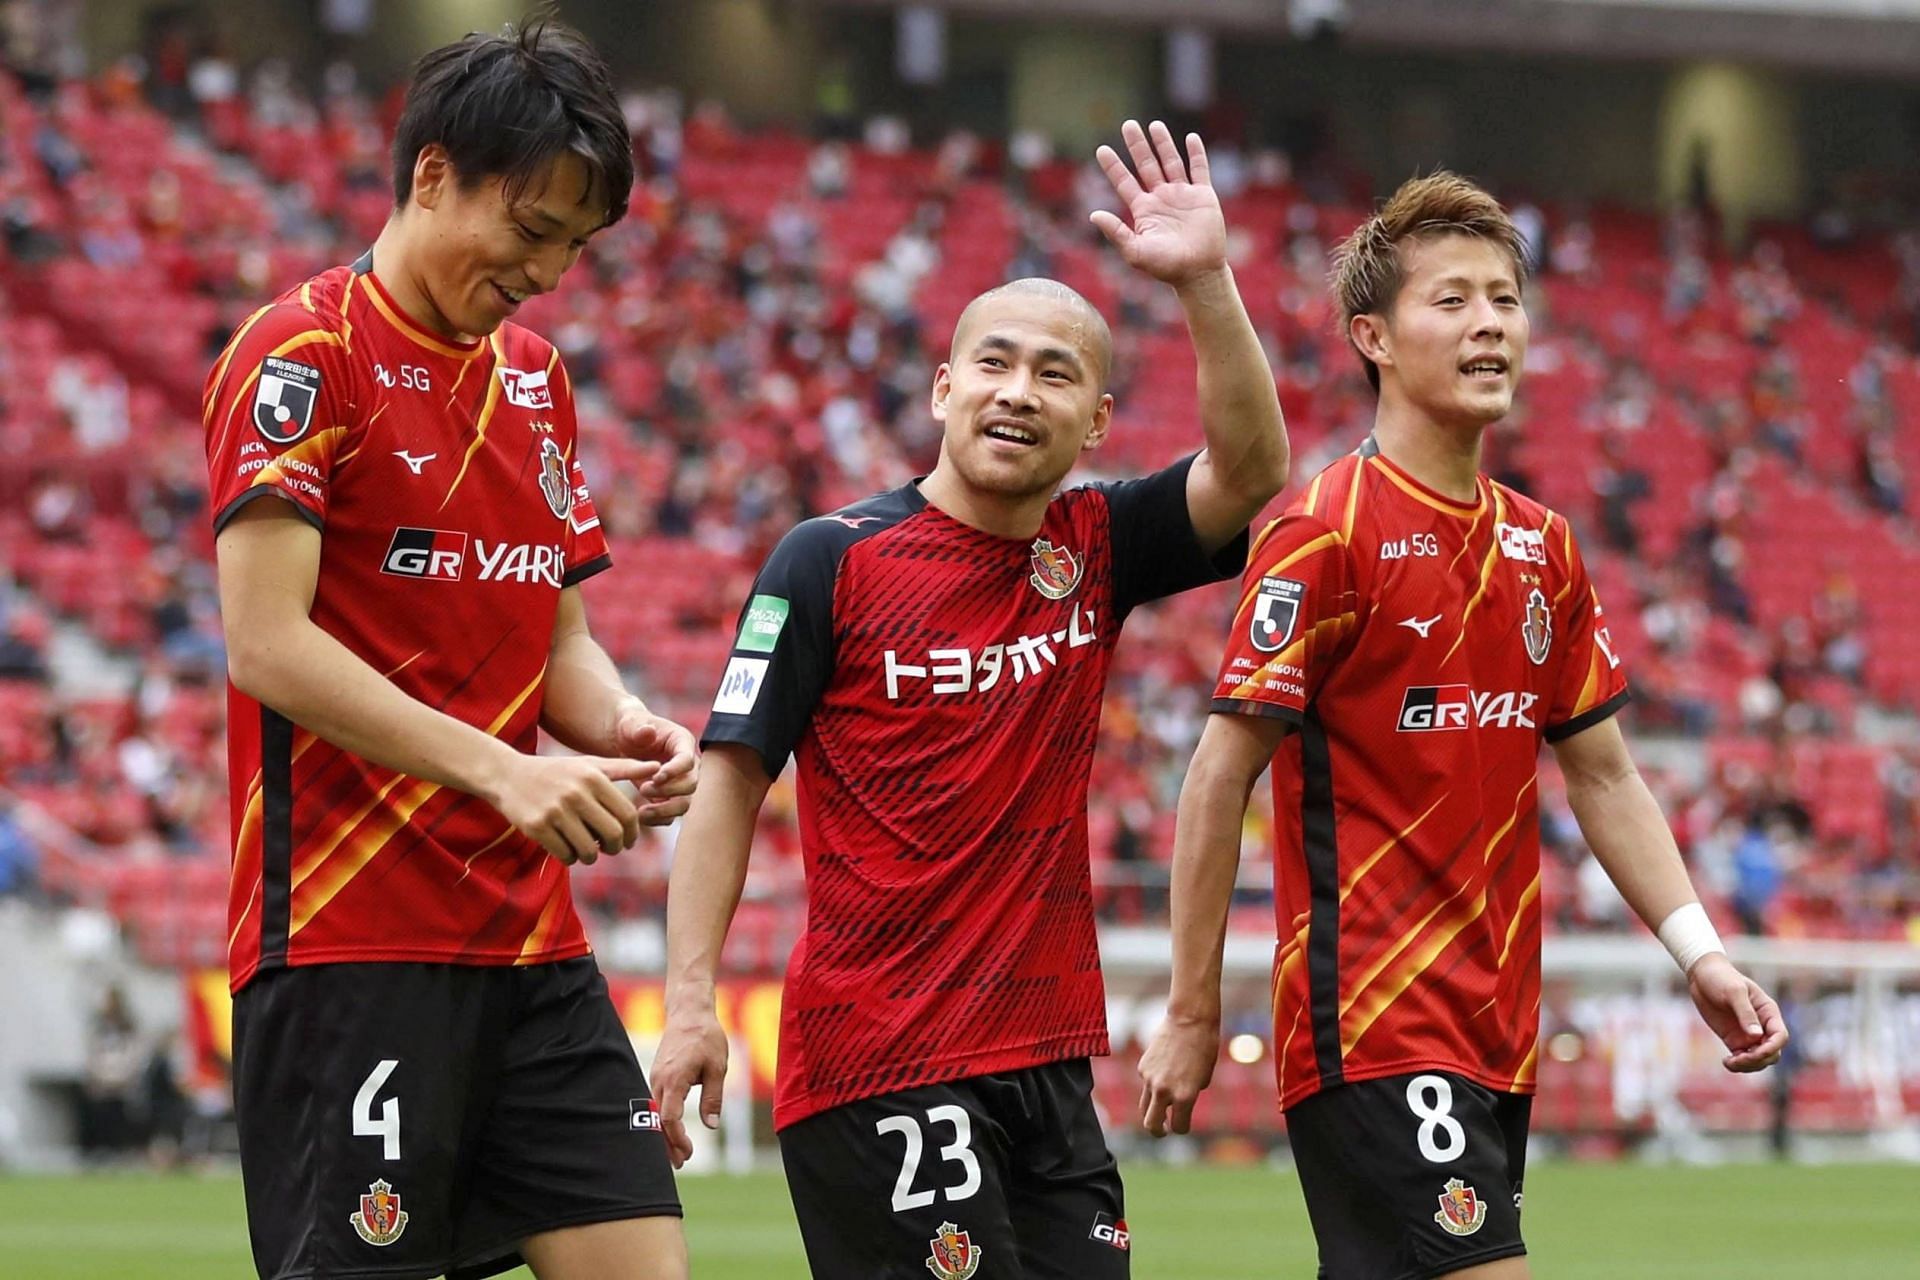 Nagoya Grampus square off against Cerezo Osaka in their upcoming J1 League fixture on Saturday